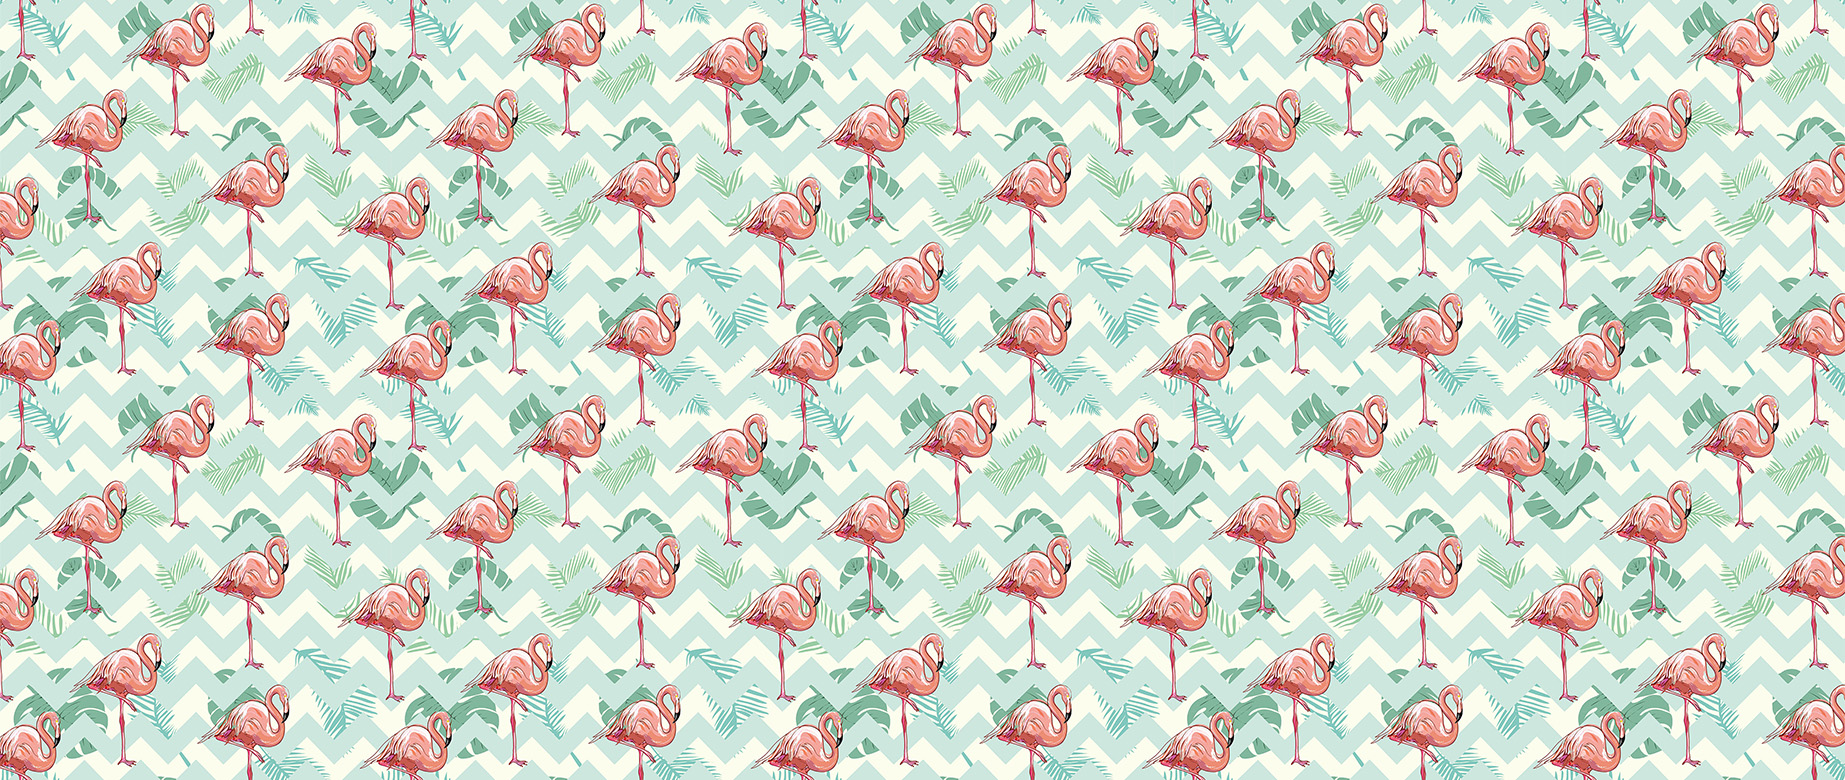 flamingos-on-modern-geometric-pattern-wallpapers-full-wide-view